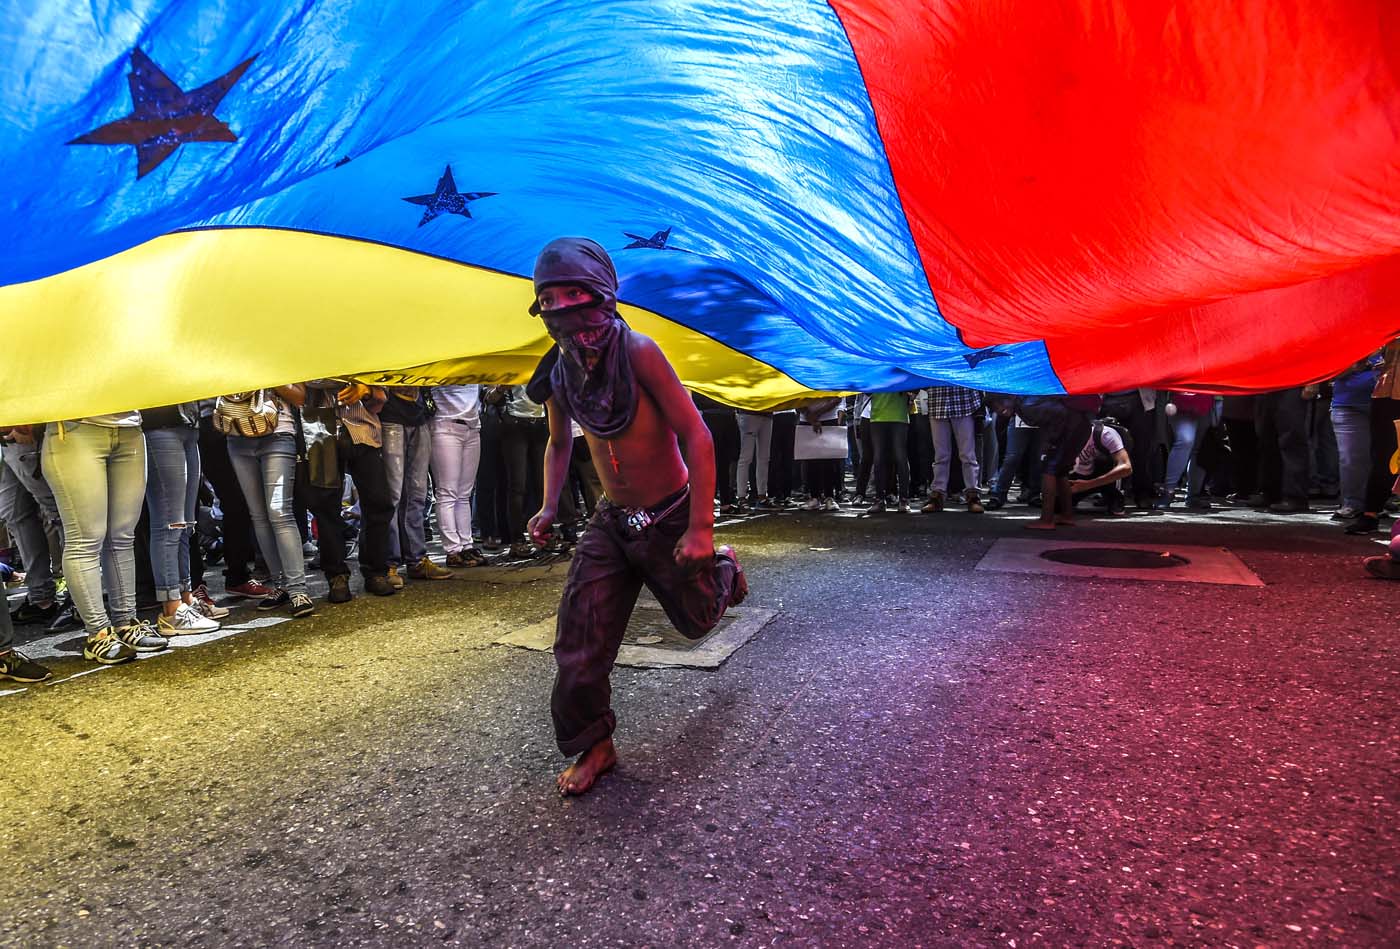 A boy runs under a Venezuelan flag during a protest of journalists and media workers against the attacks on journalists, in Caracas on June 27, 2017. / AFP PHOTO / JUAN BARRETO